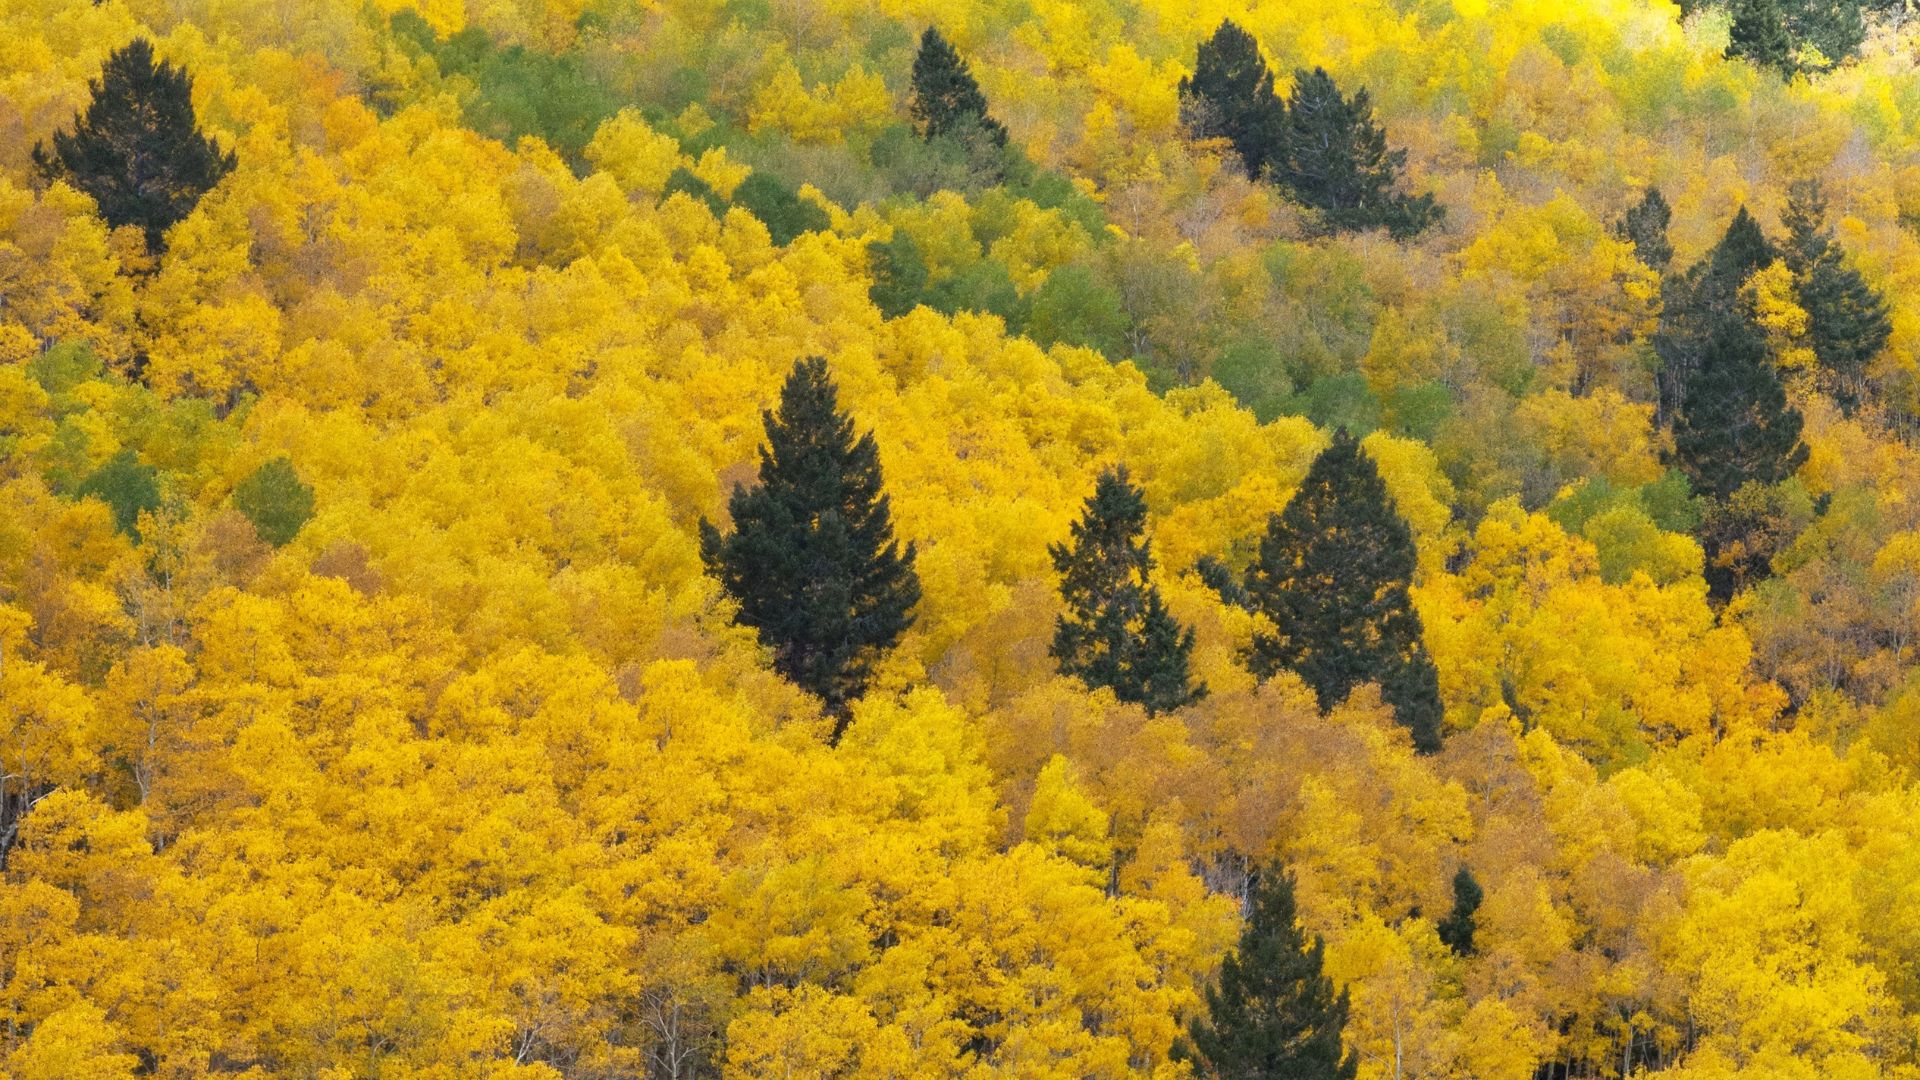 Stunning aerial view of bright yellow aspens in the fall